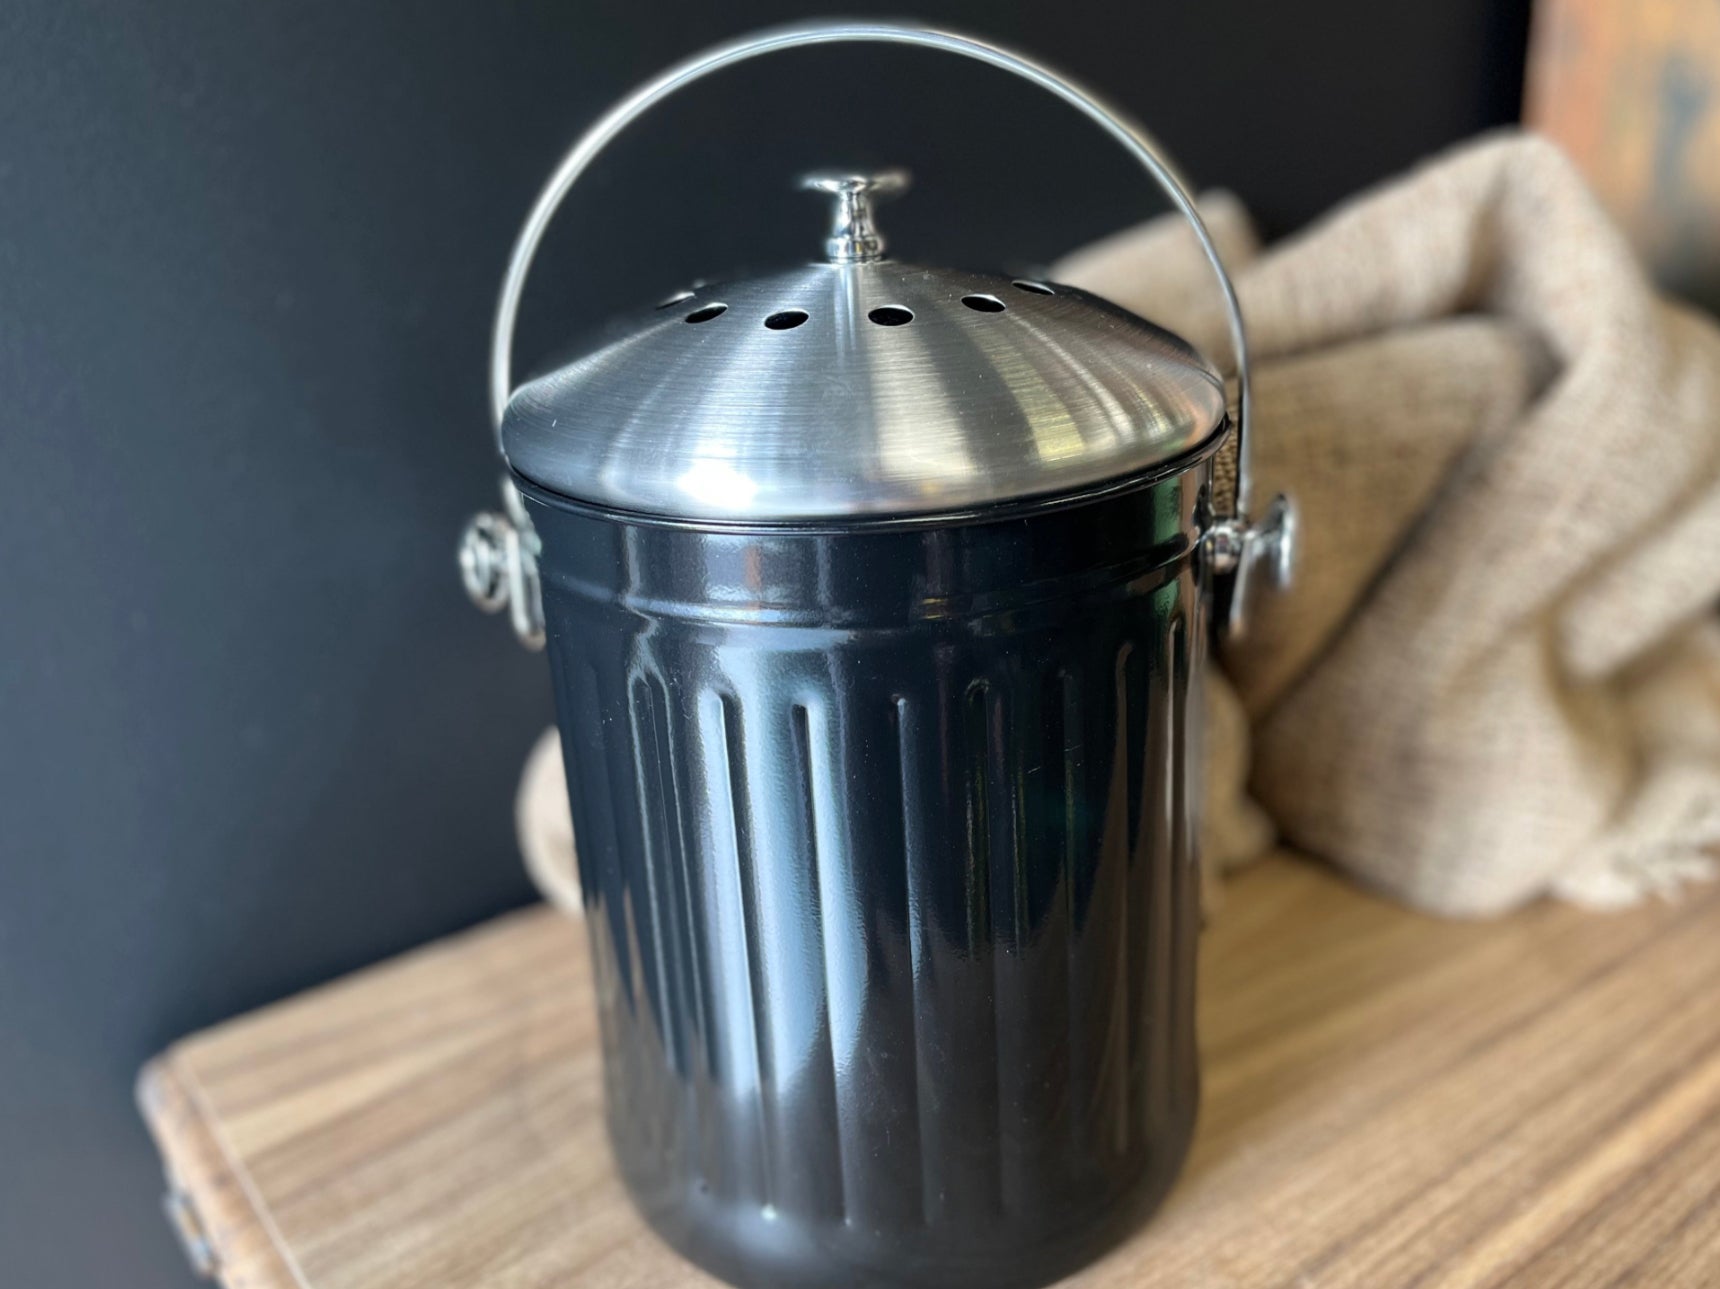 Black & Stainless 5L Compost Bin